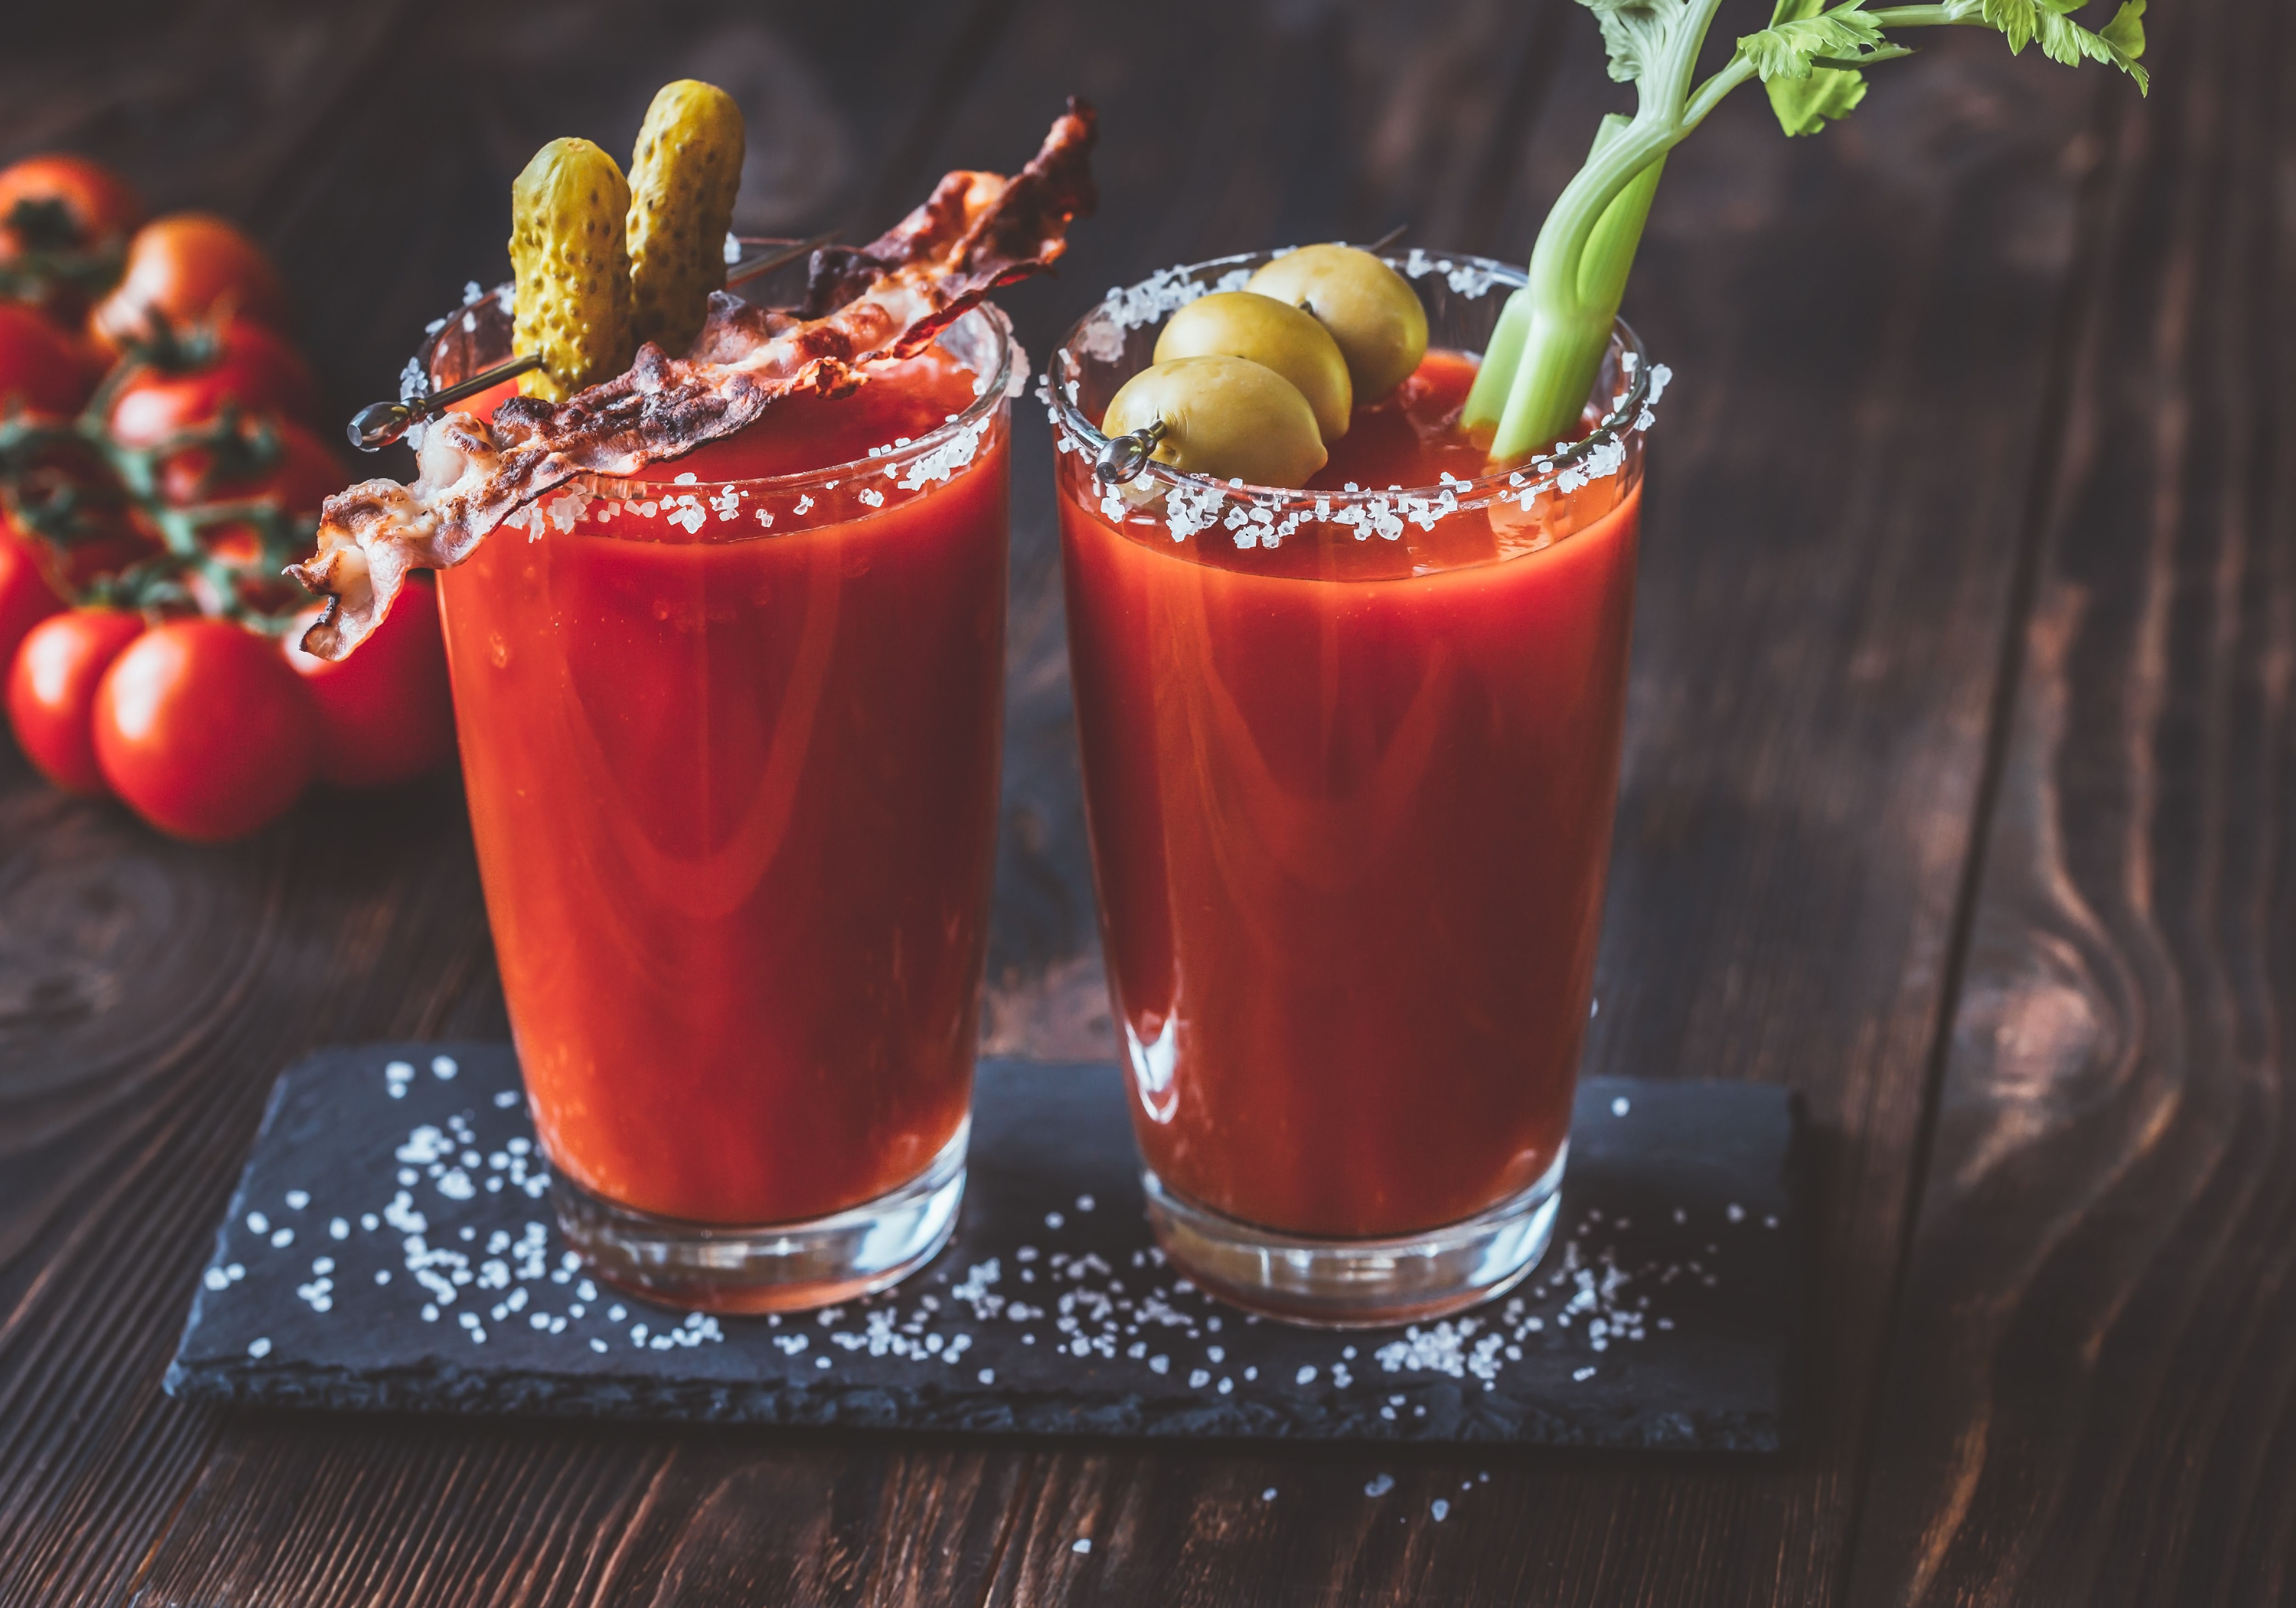 https://hips.hearstapps.com/hmg-prod/images/two-glasses-of-bloody-mary-royalty-free-image-1577186719.jpg